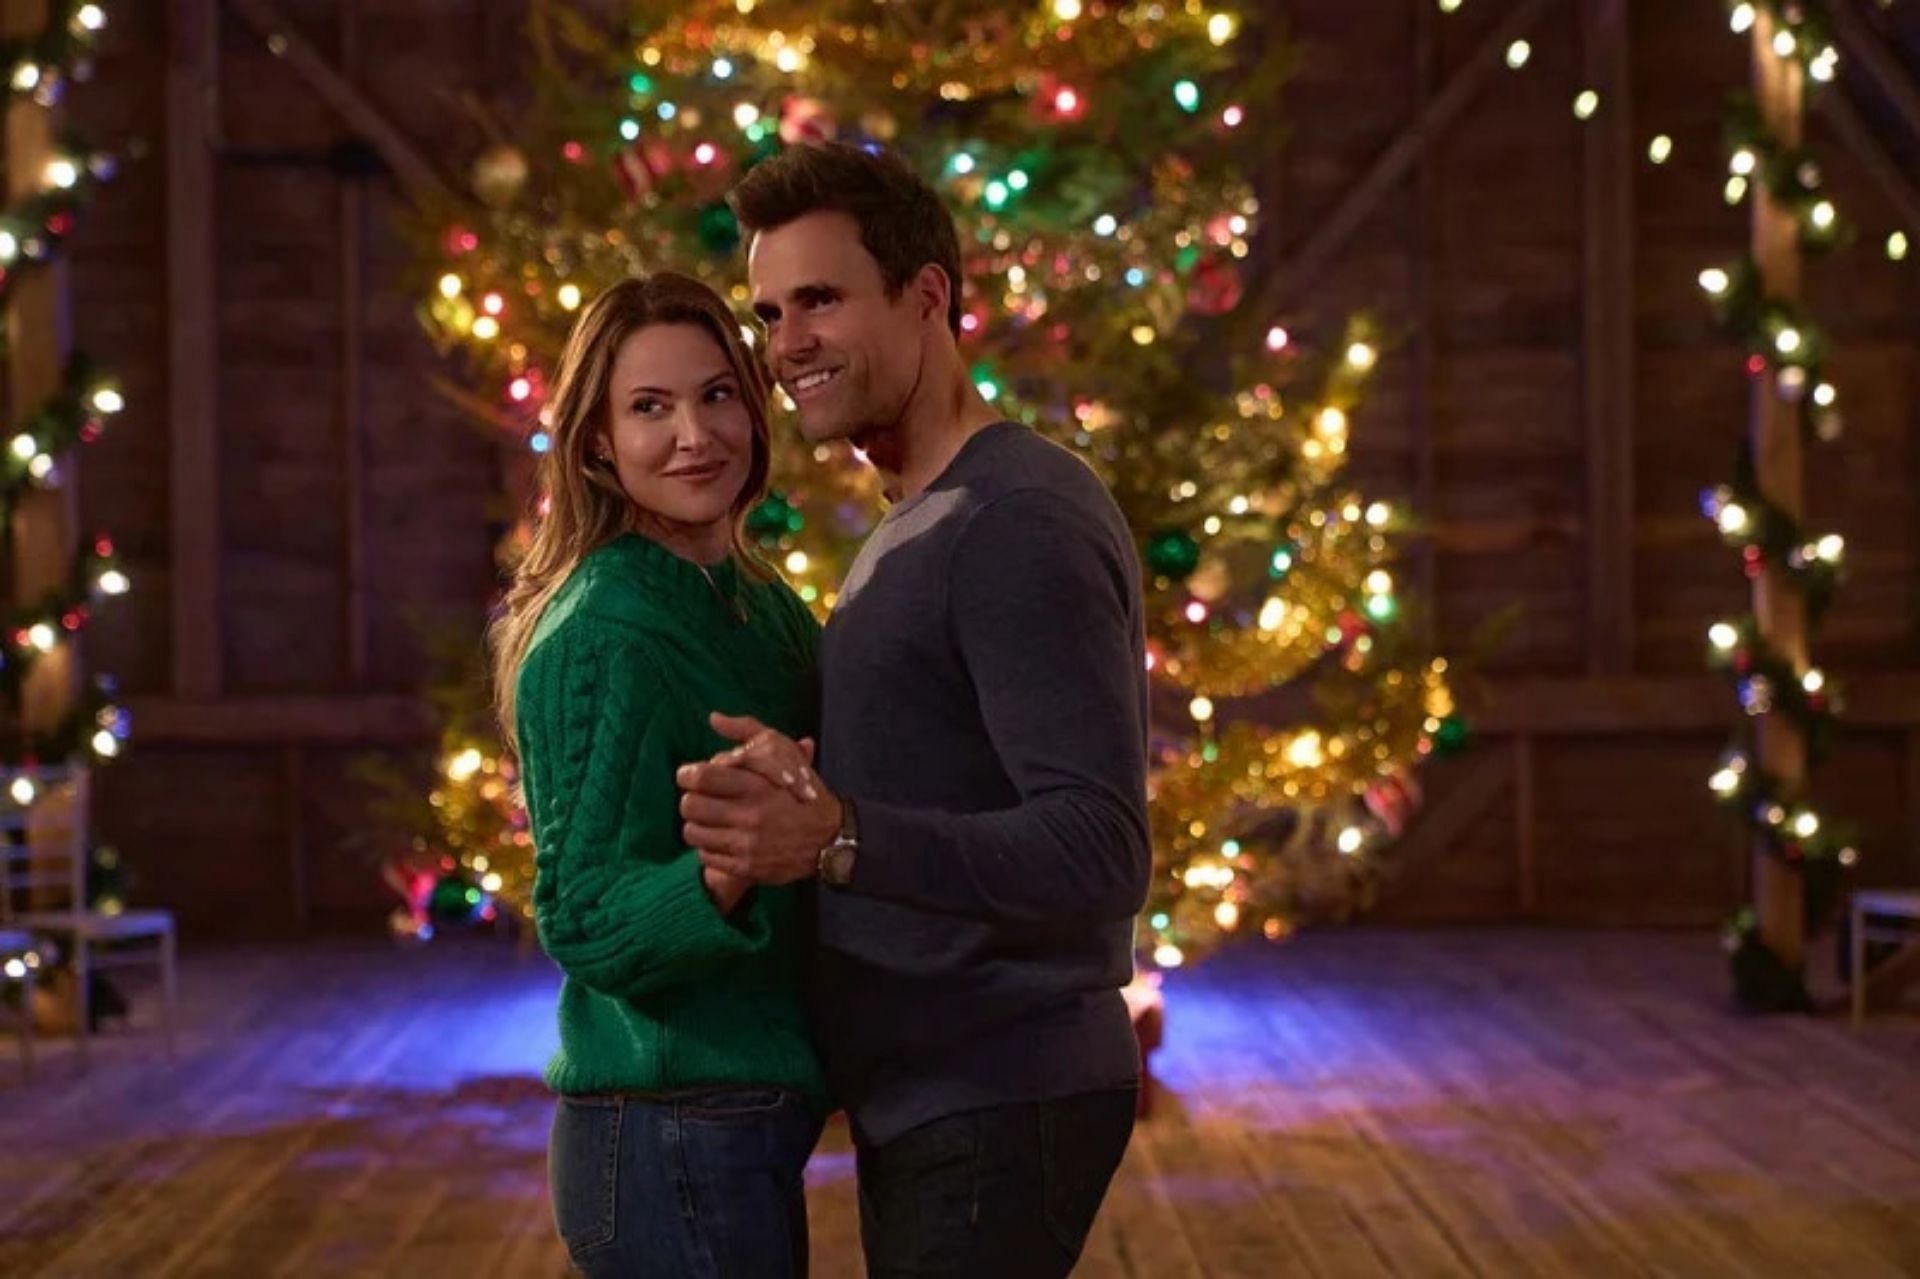 A Merry Christmas Wish cast list Jill Wagner, Cameron Mathison and